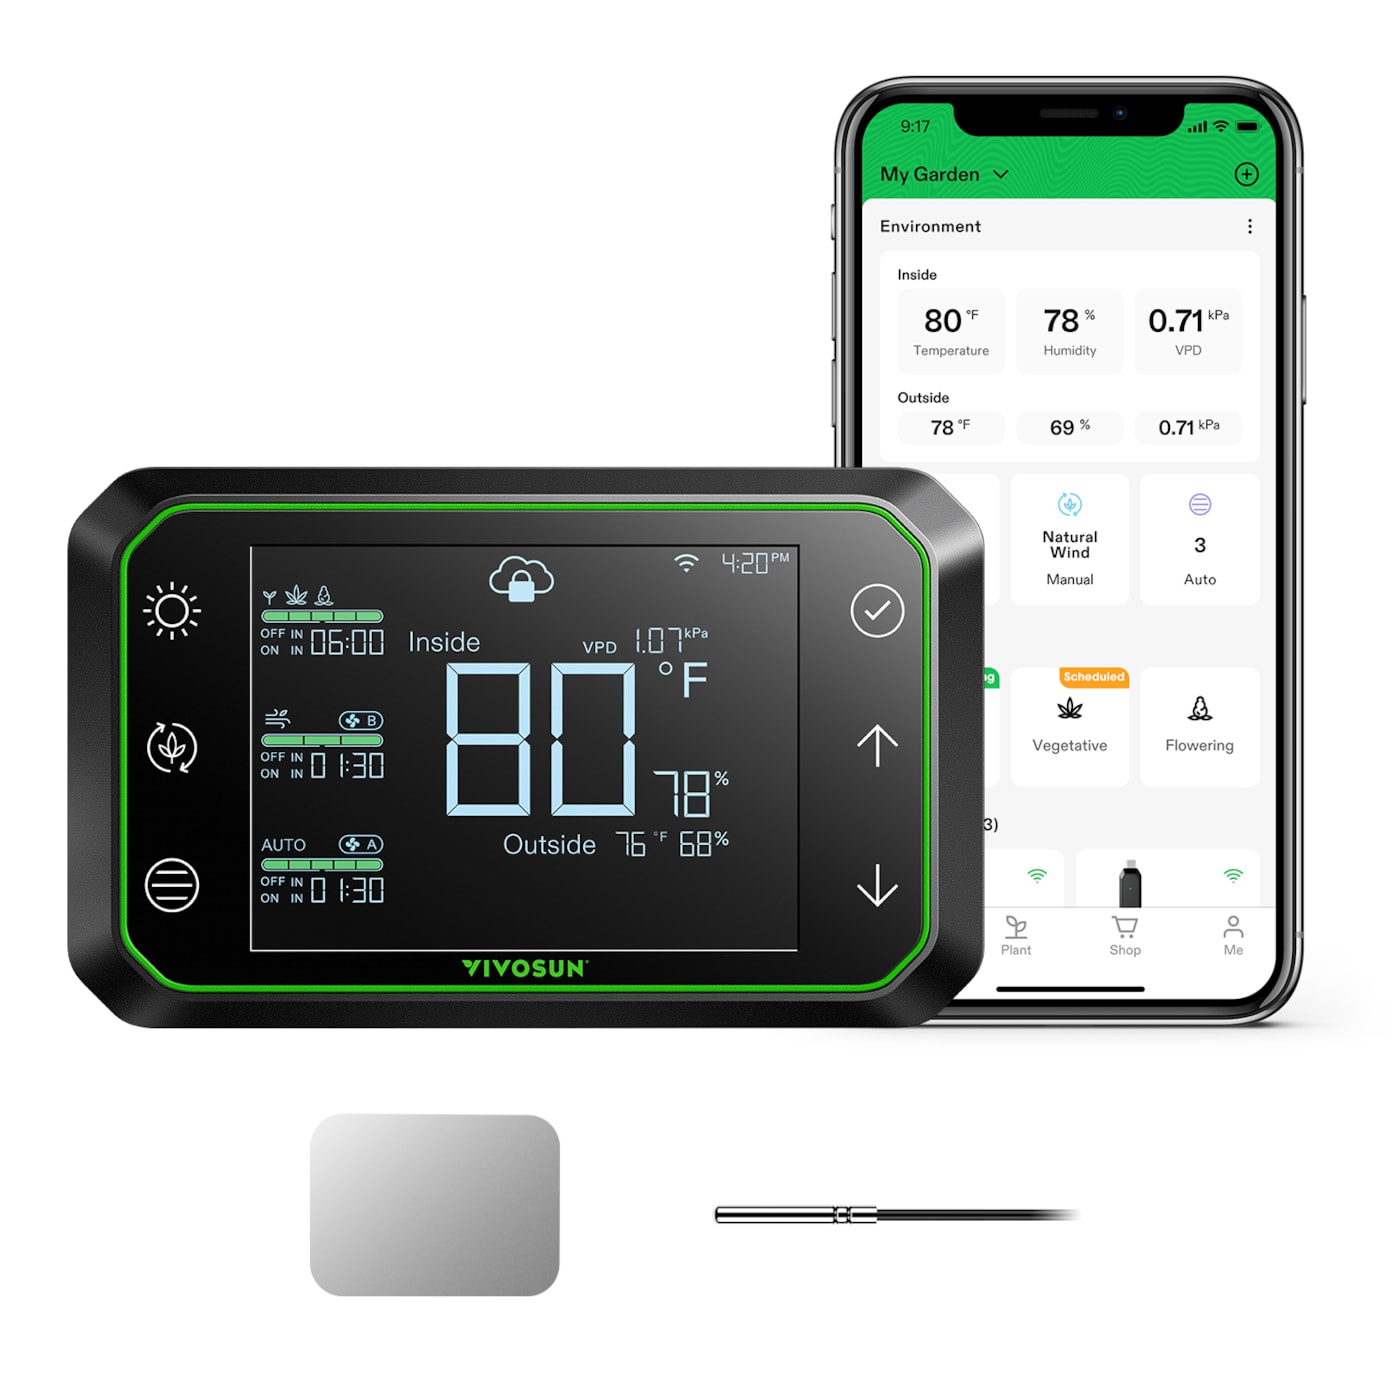 VIVOSUN GrowHub Controller E42, Smart Environmental WiFi-Controller with Temperature, Humidity, Timer, Cycle, Schedule Controls, for Grow Tent Cooling Ventilation Lighting, Used for Kits